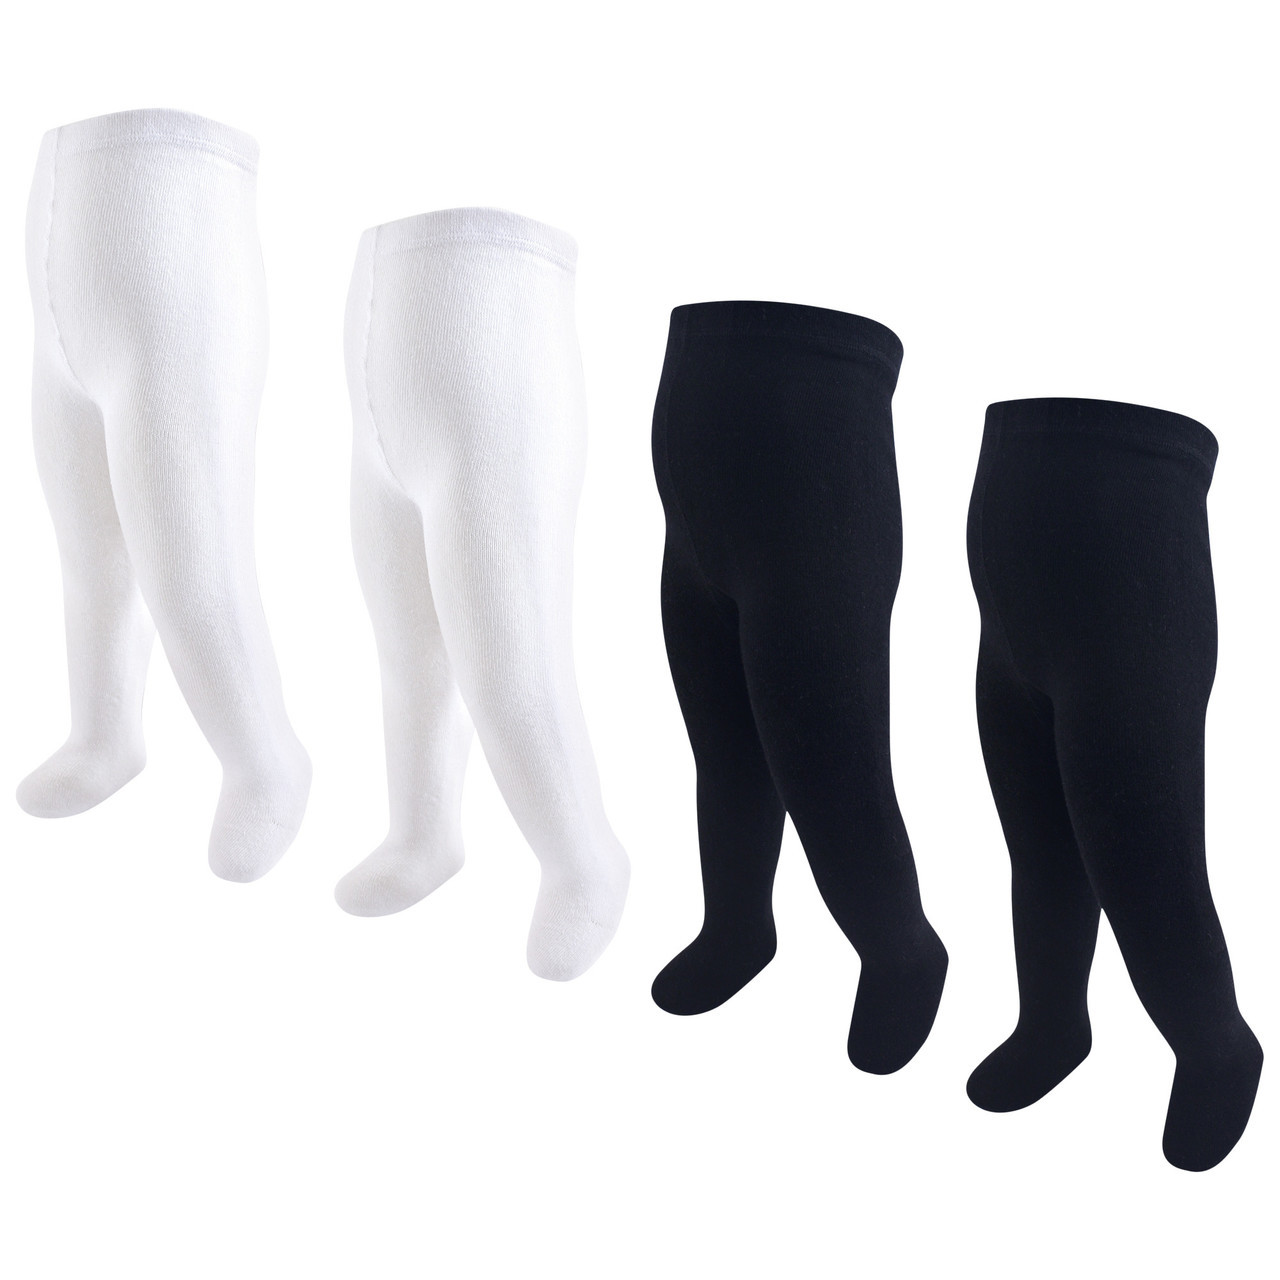 Hudson Baby Cotton Tights, 4-Pack, Black and White  Baby and Toddler  Clothes, Accessories and Essentials